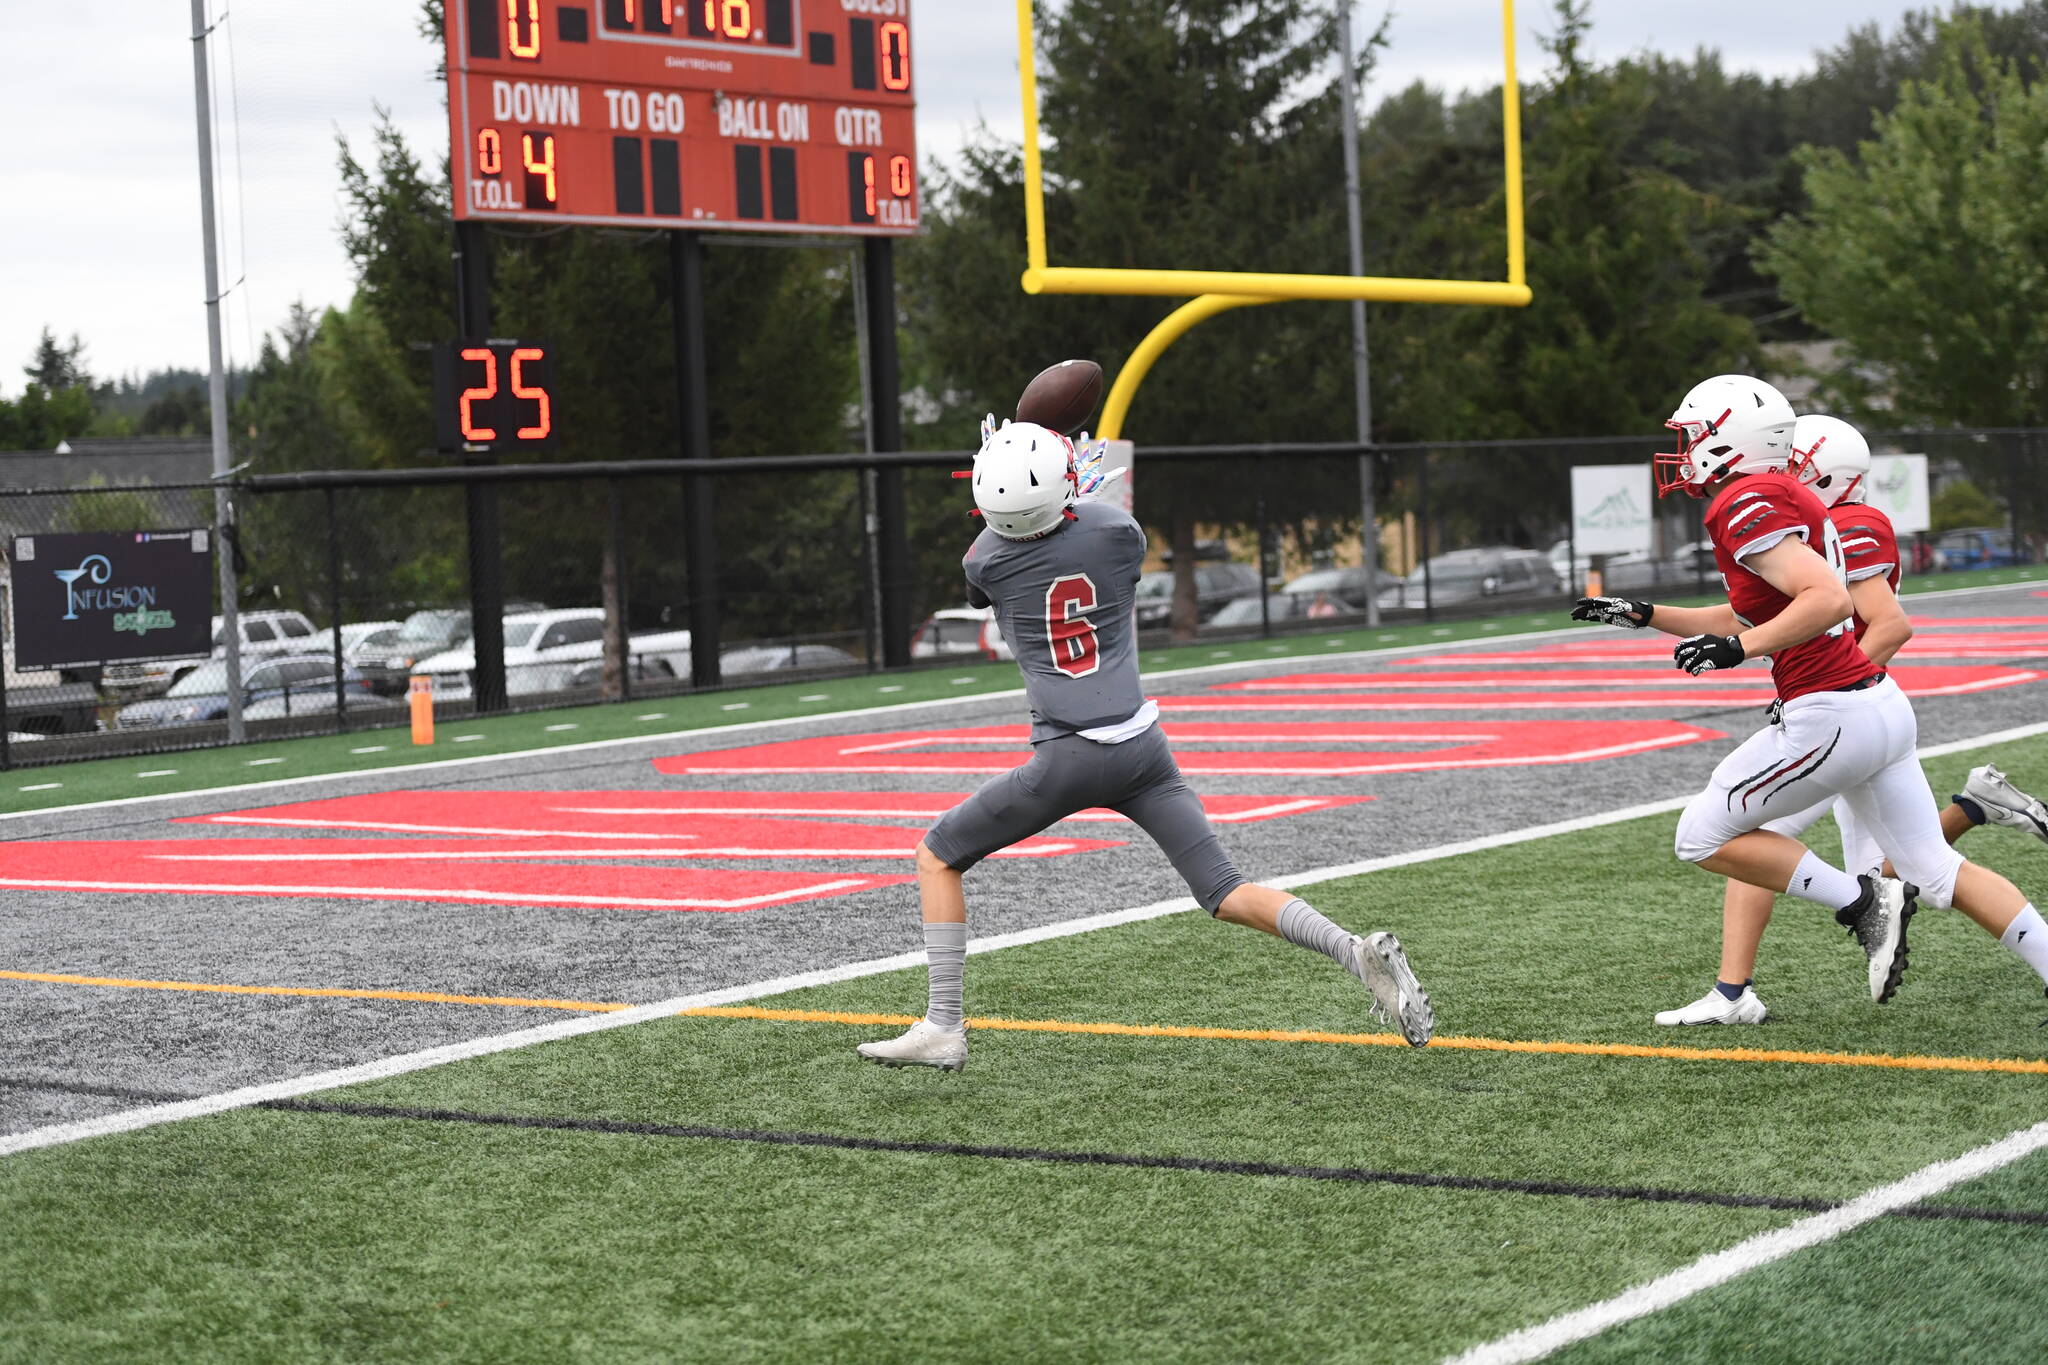 Senior wide receiver Ryder Wiess receiver makes a catch in an inter-squad game on Aug. 26. Photo Courtesy of Calder Productions.